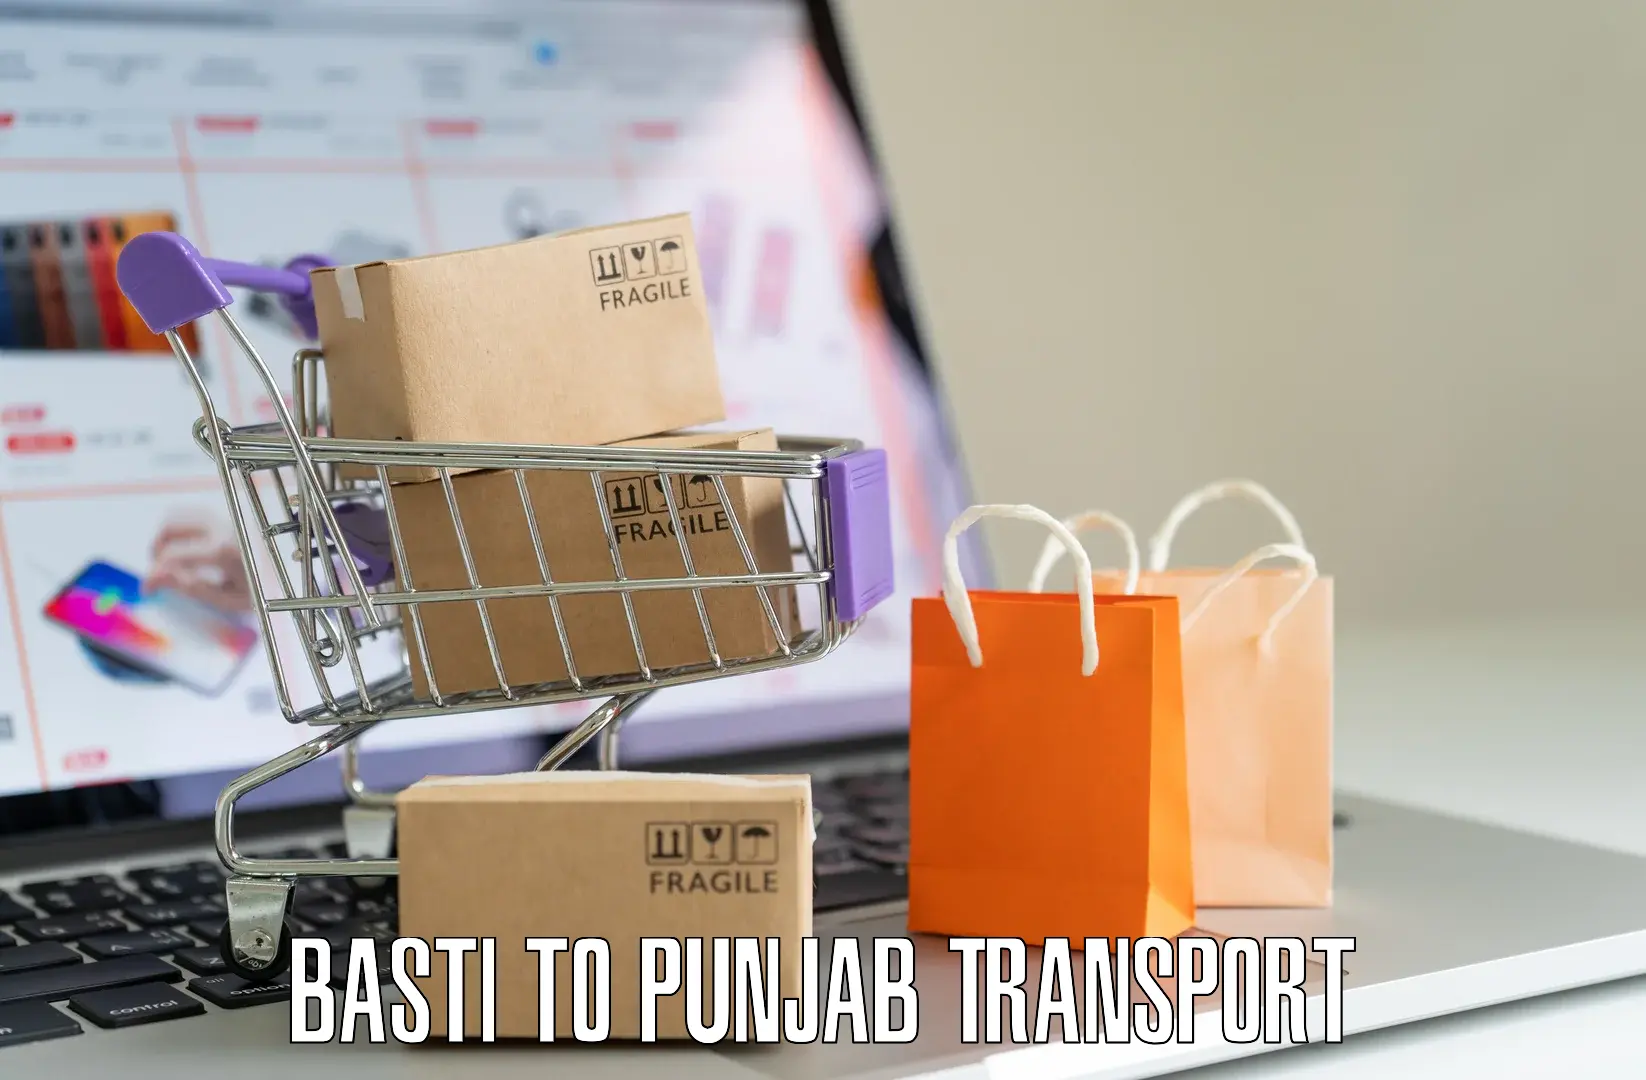 Daily parcel service transport Basti to Sultanpur Lodhi